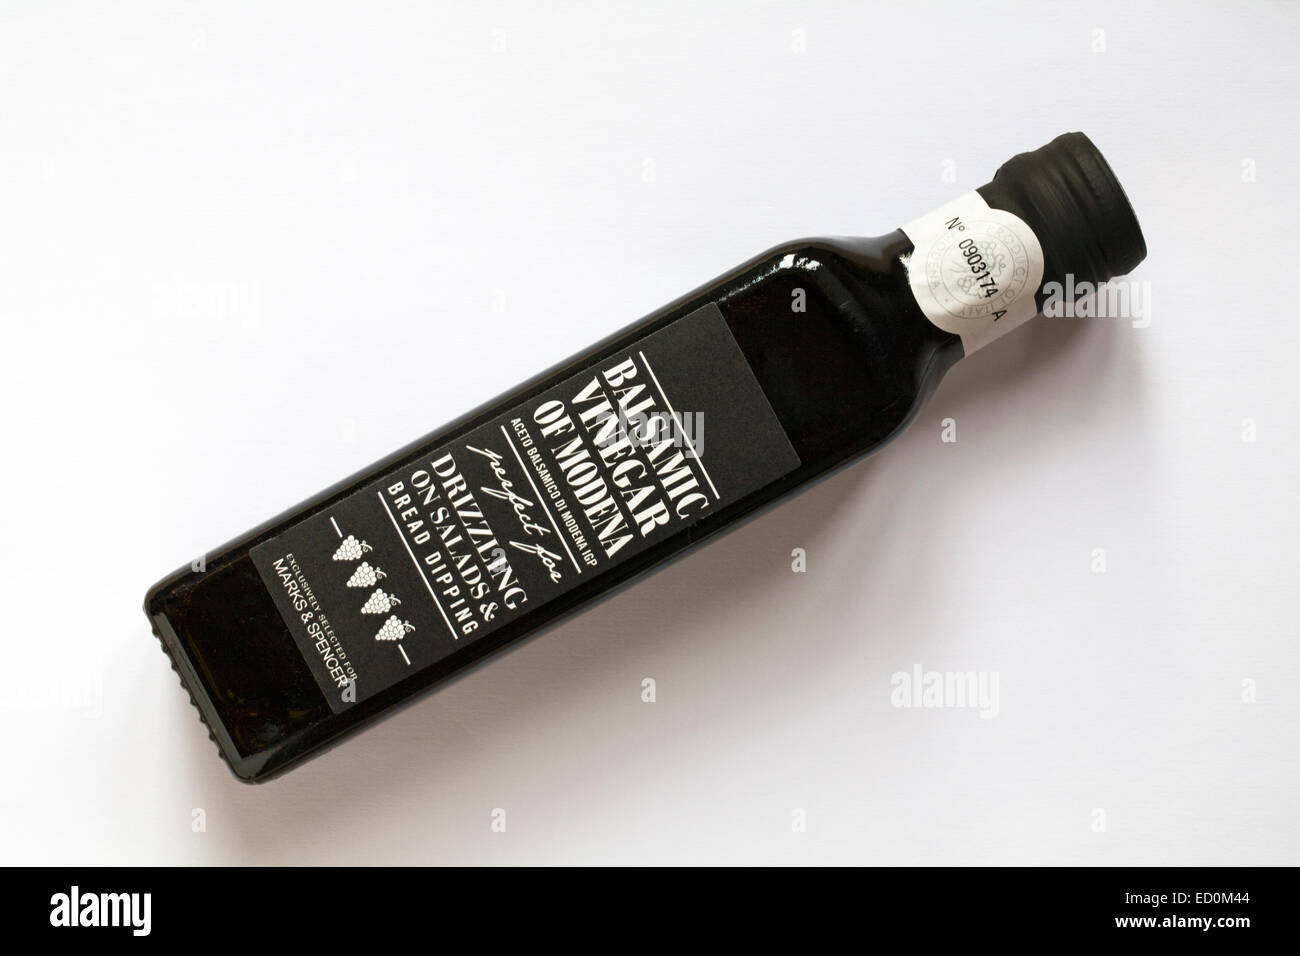 Bottle of Balsamic Vinegar of Modena perfect for drizzling on salads & bread dipping isolated on white background Stock Photo